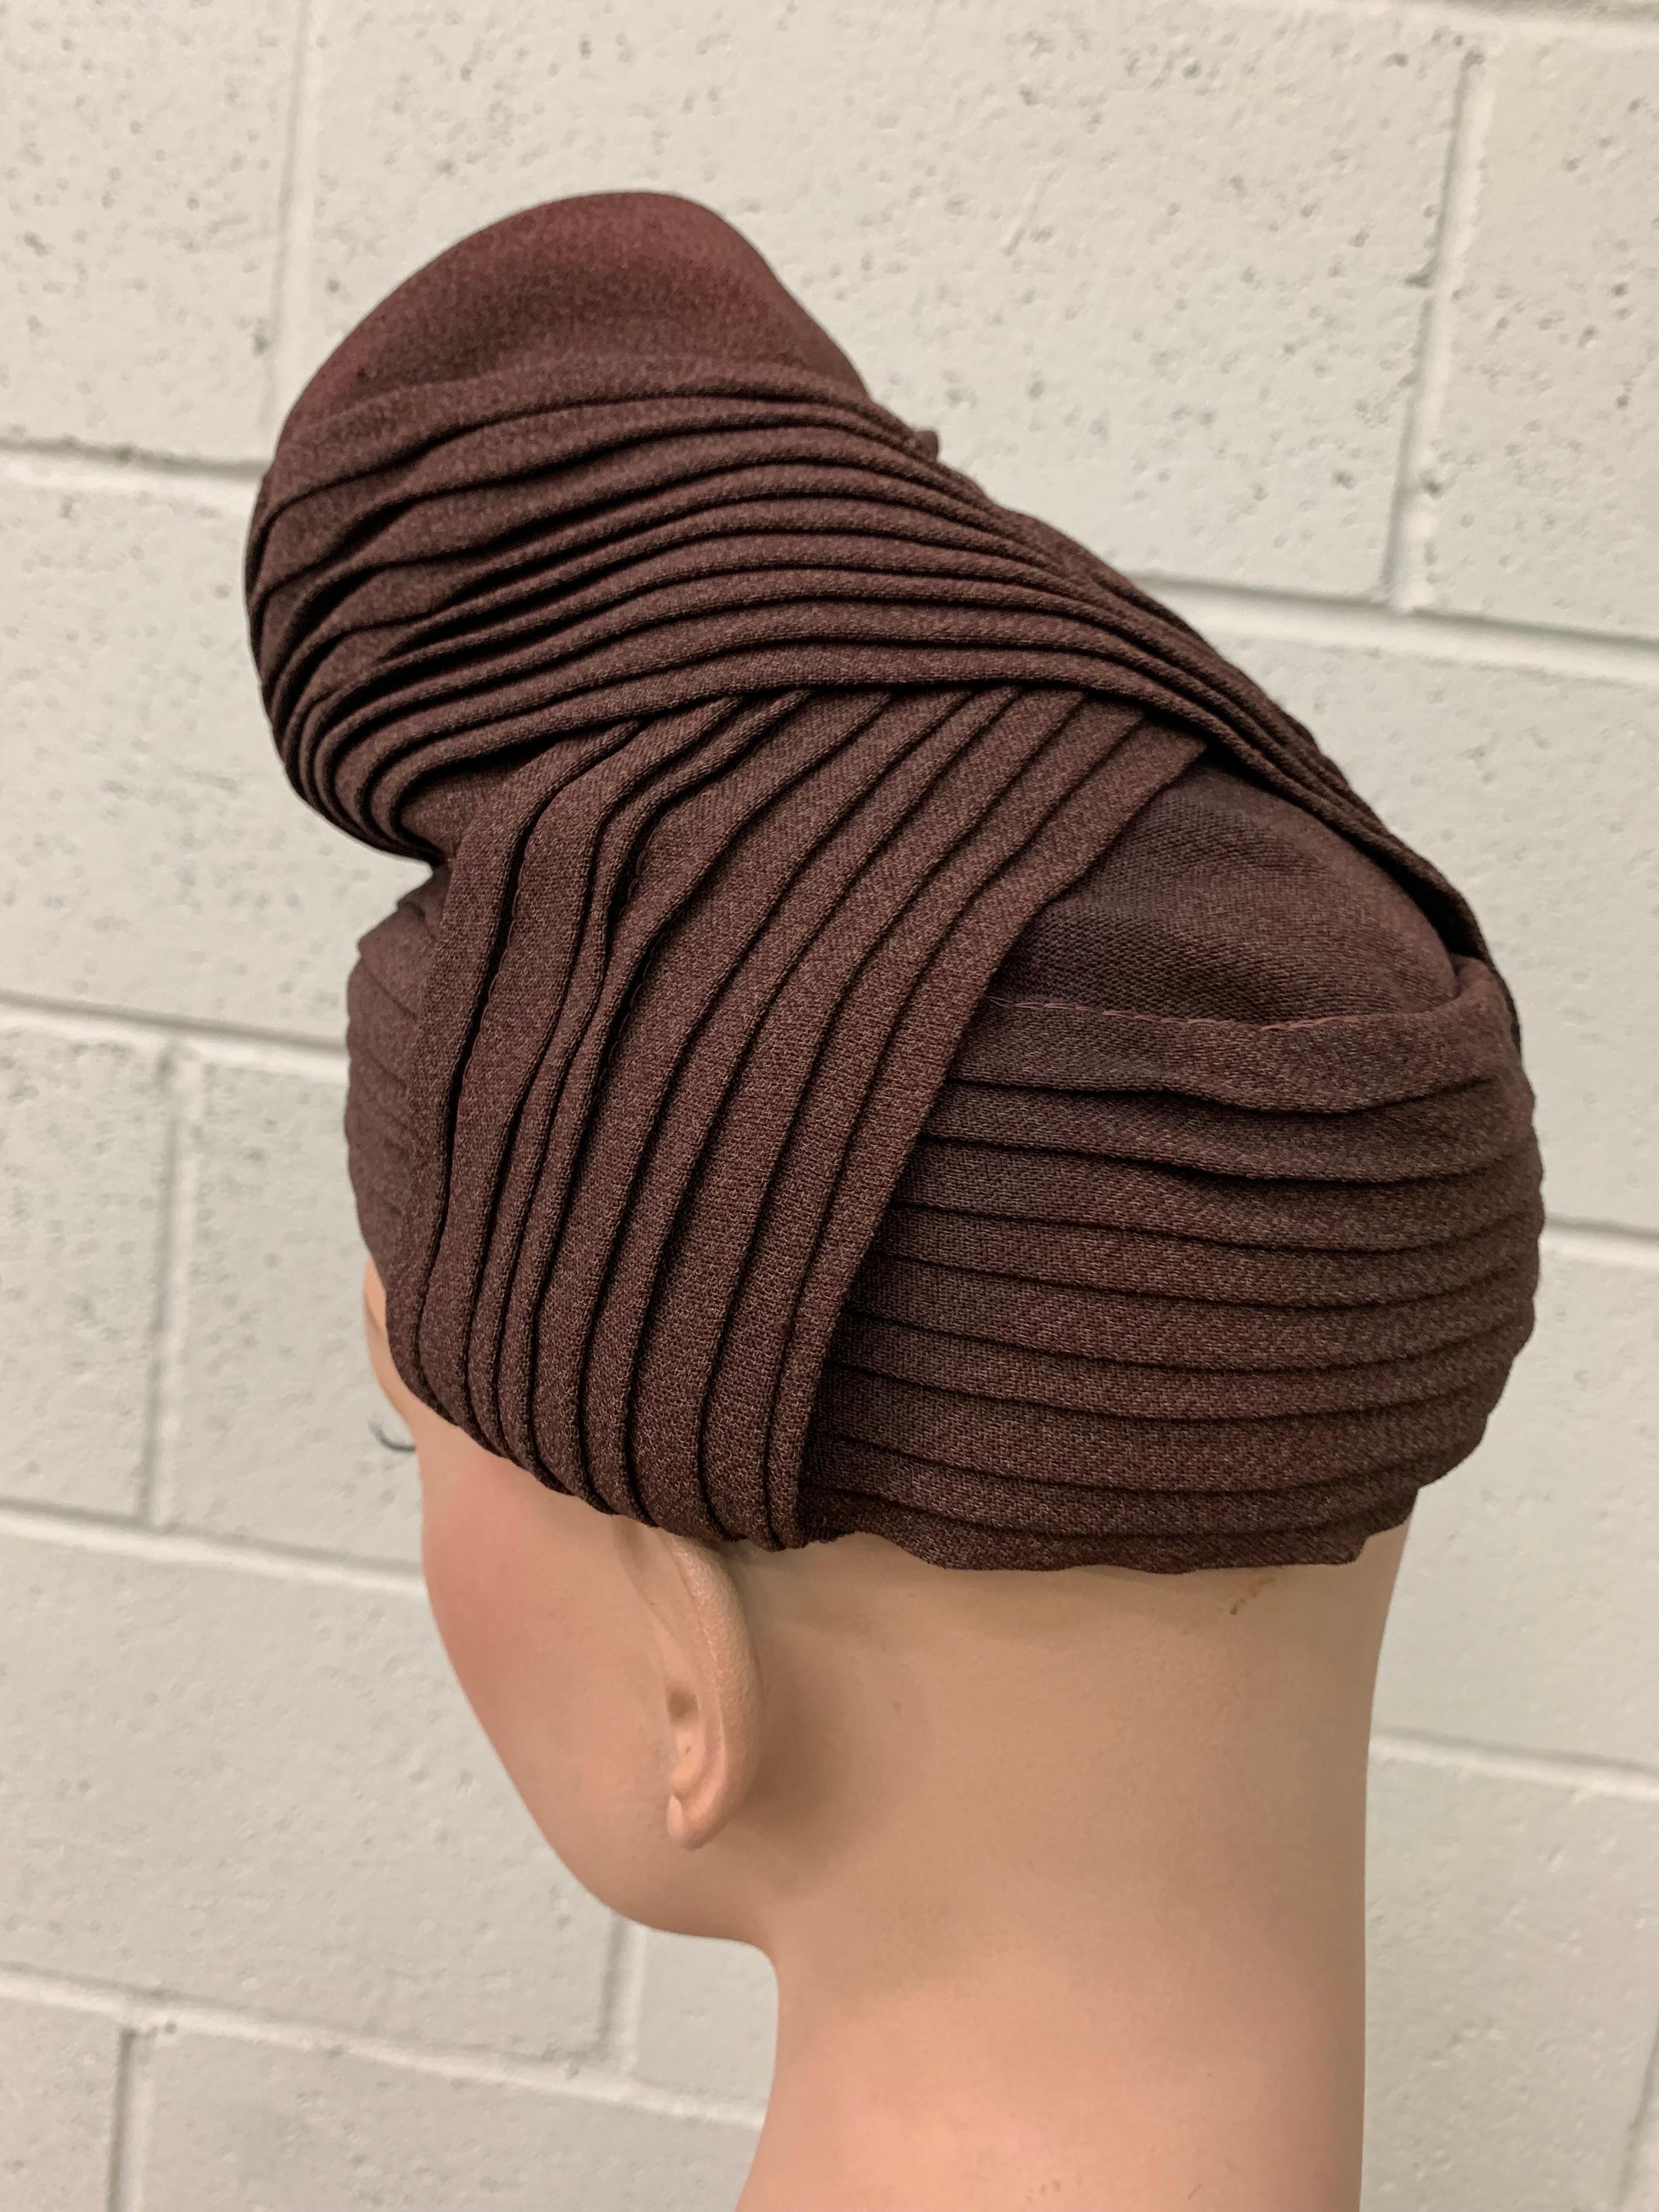 1940s Brown Pleated Crepe Turban w Funnel Shape at Crown - Embellish As You Like:  Unmarked high 40s Silver Screen style cocoa-brown turban with a cornucopia shaped funnel top just begging for some personalization--could be flowers? Feathers? Or a